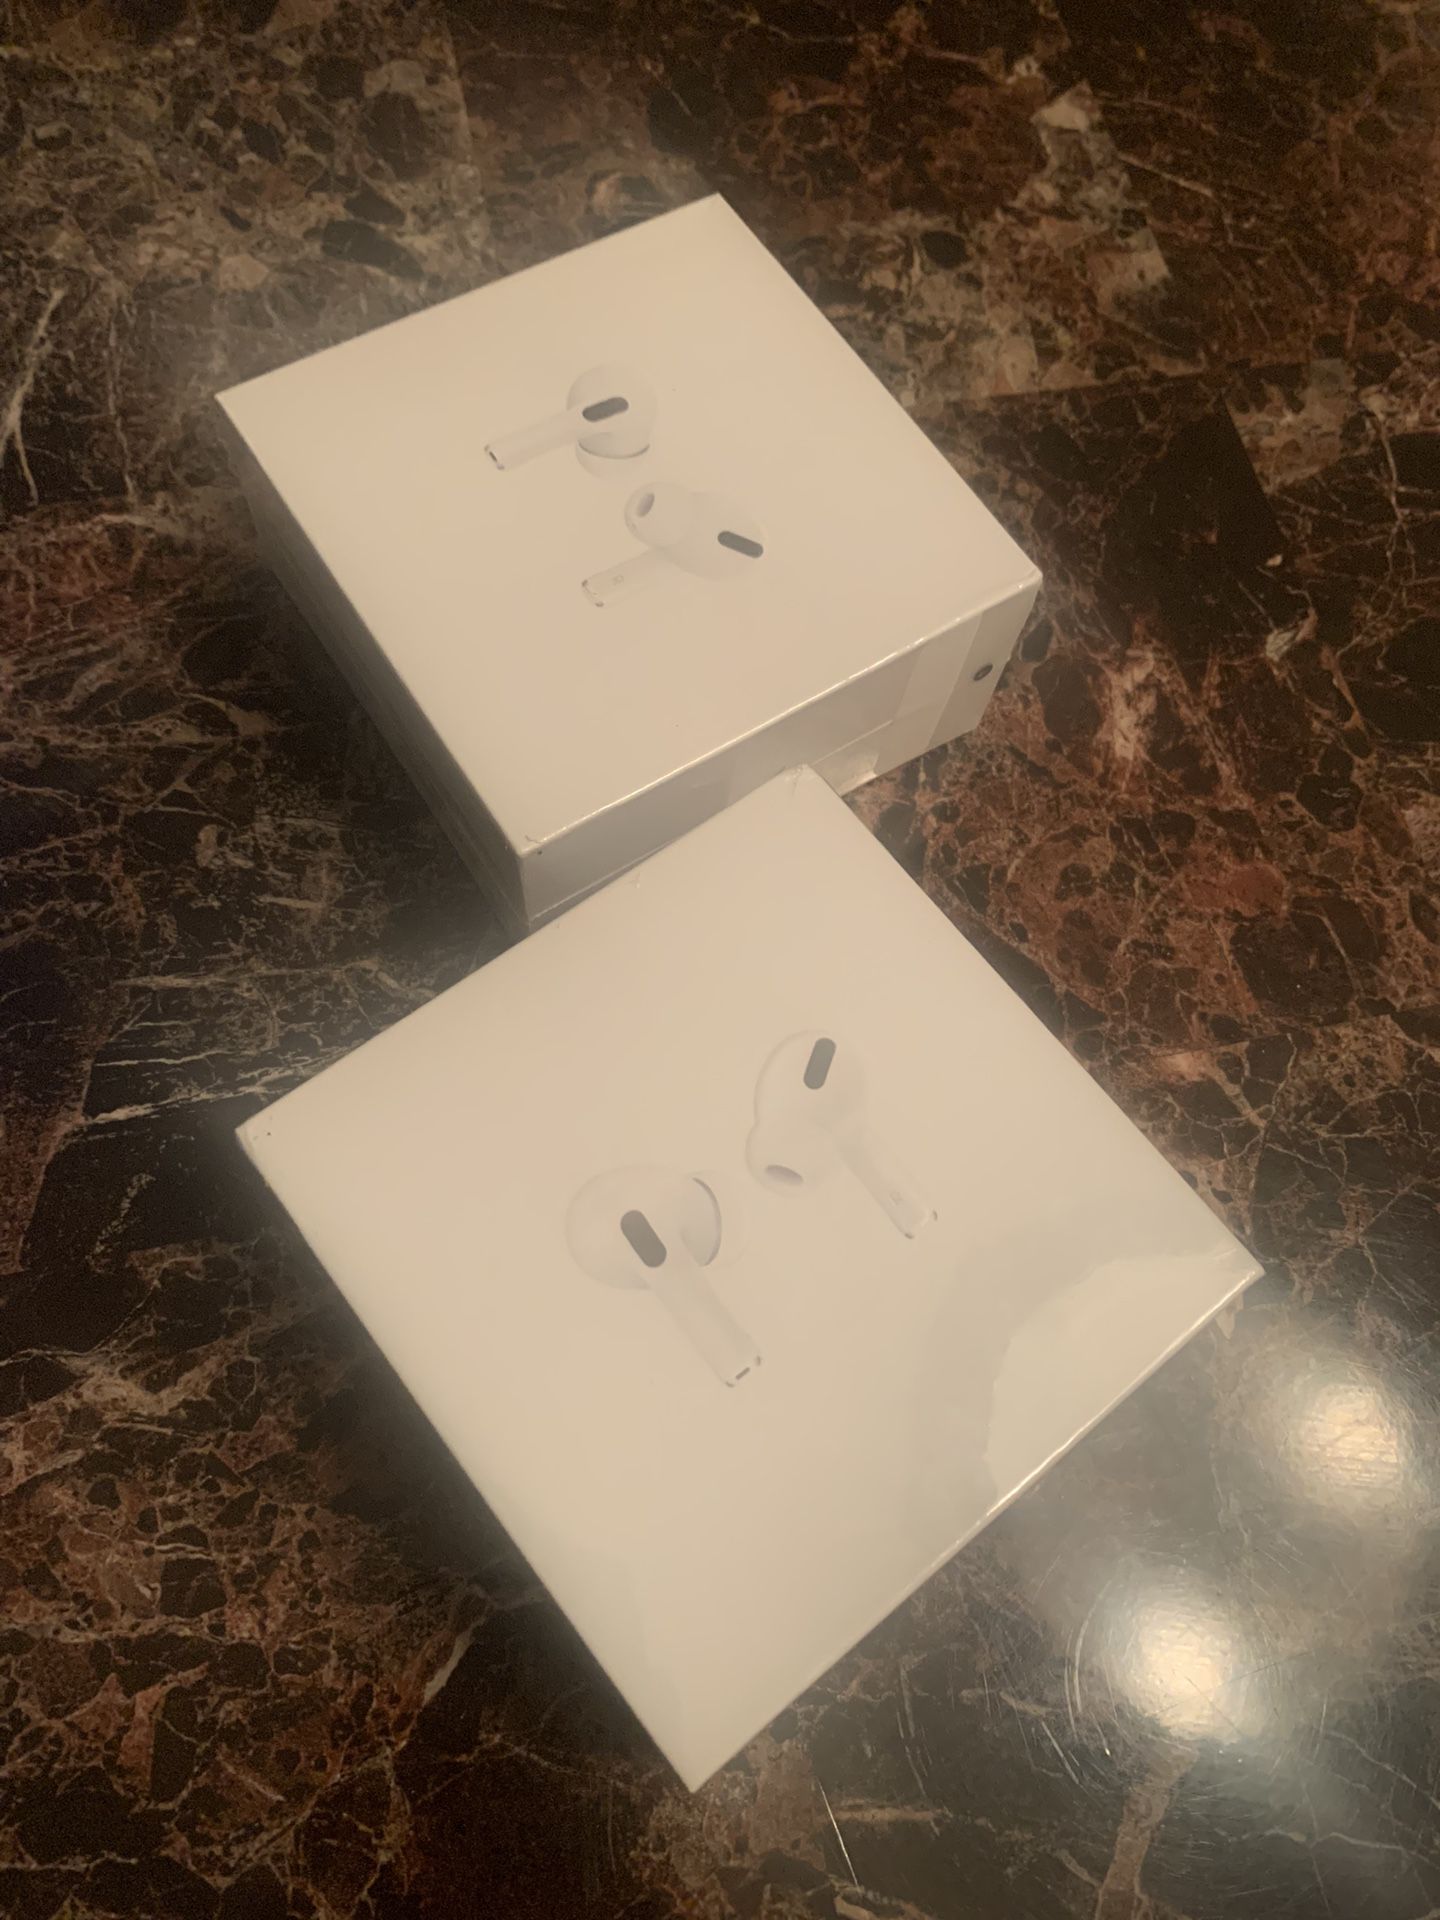 2 AirPods Pro